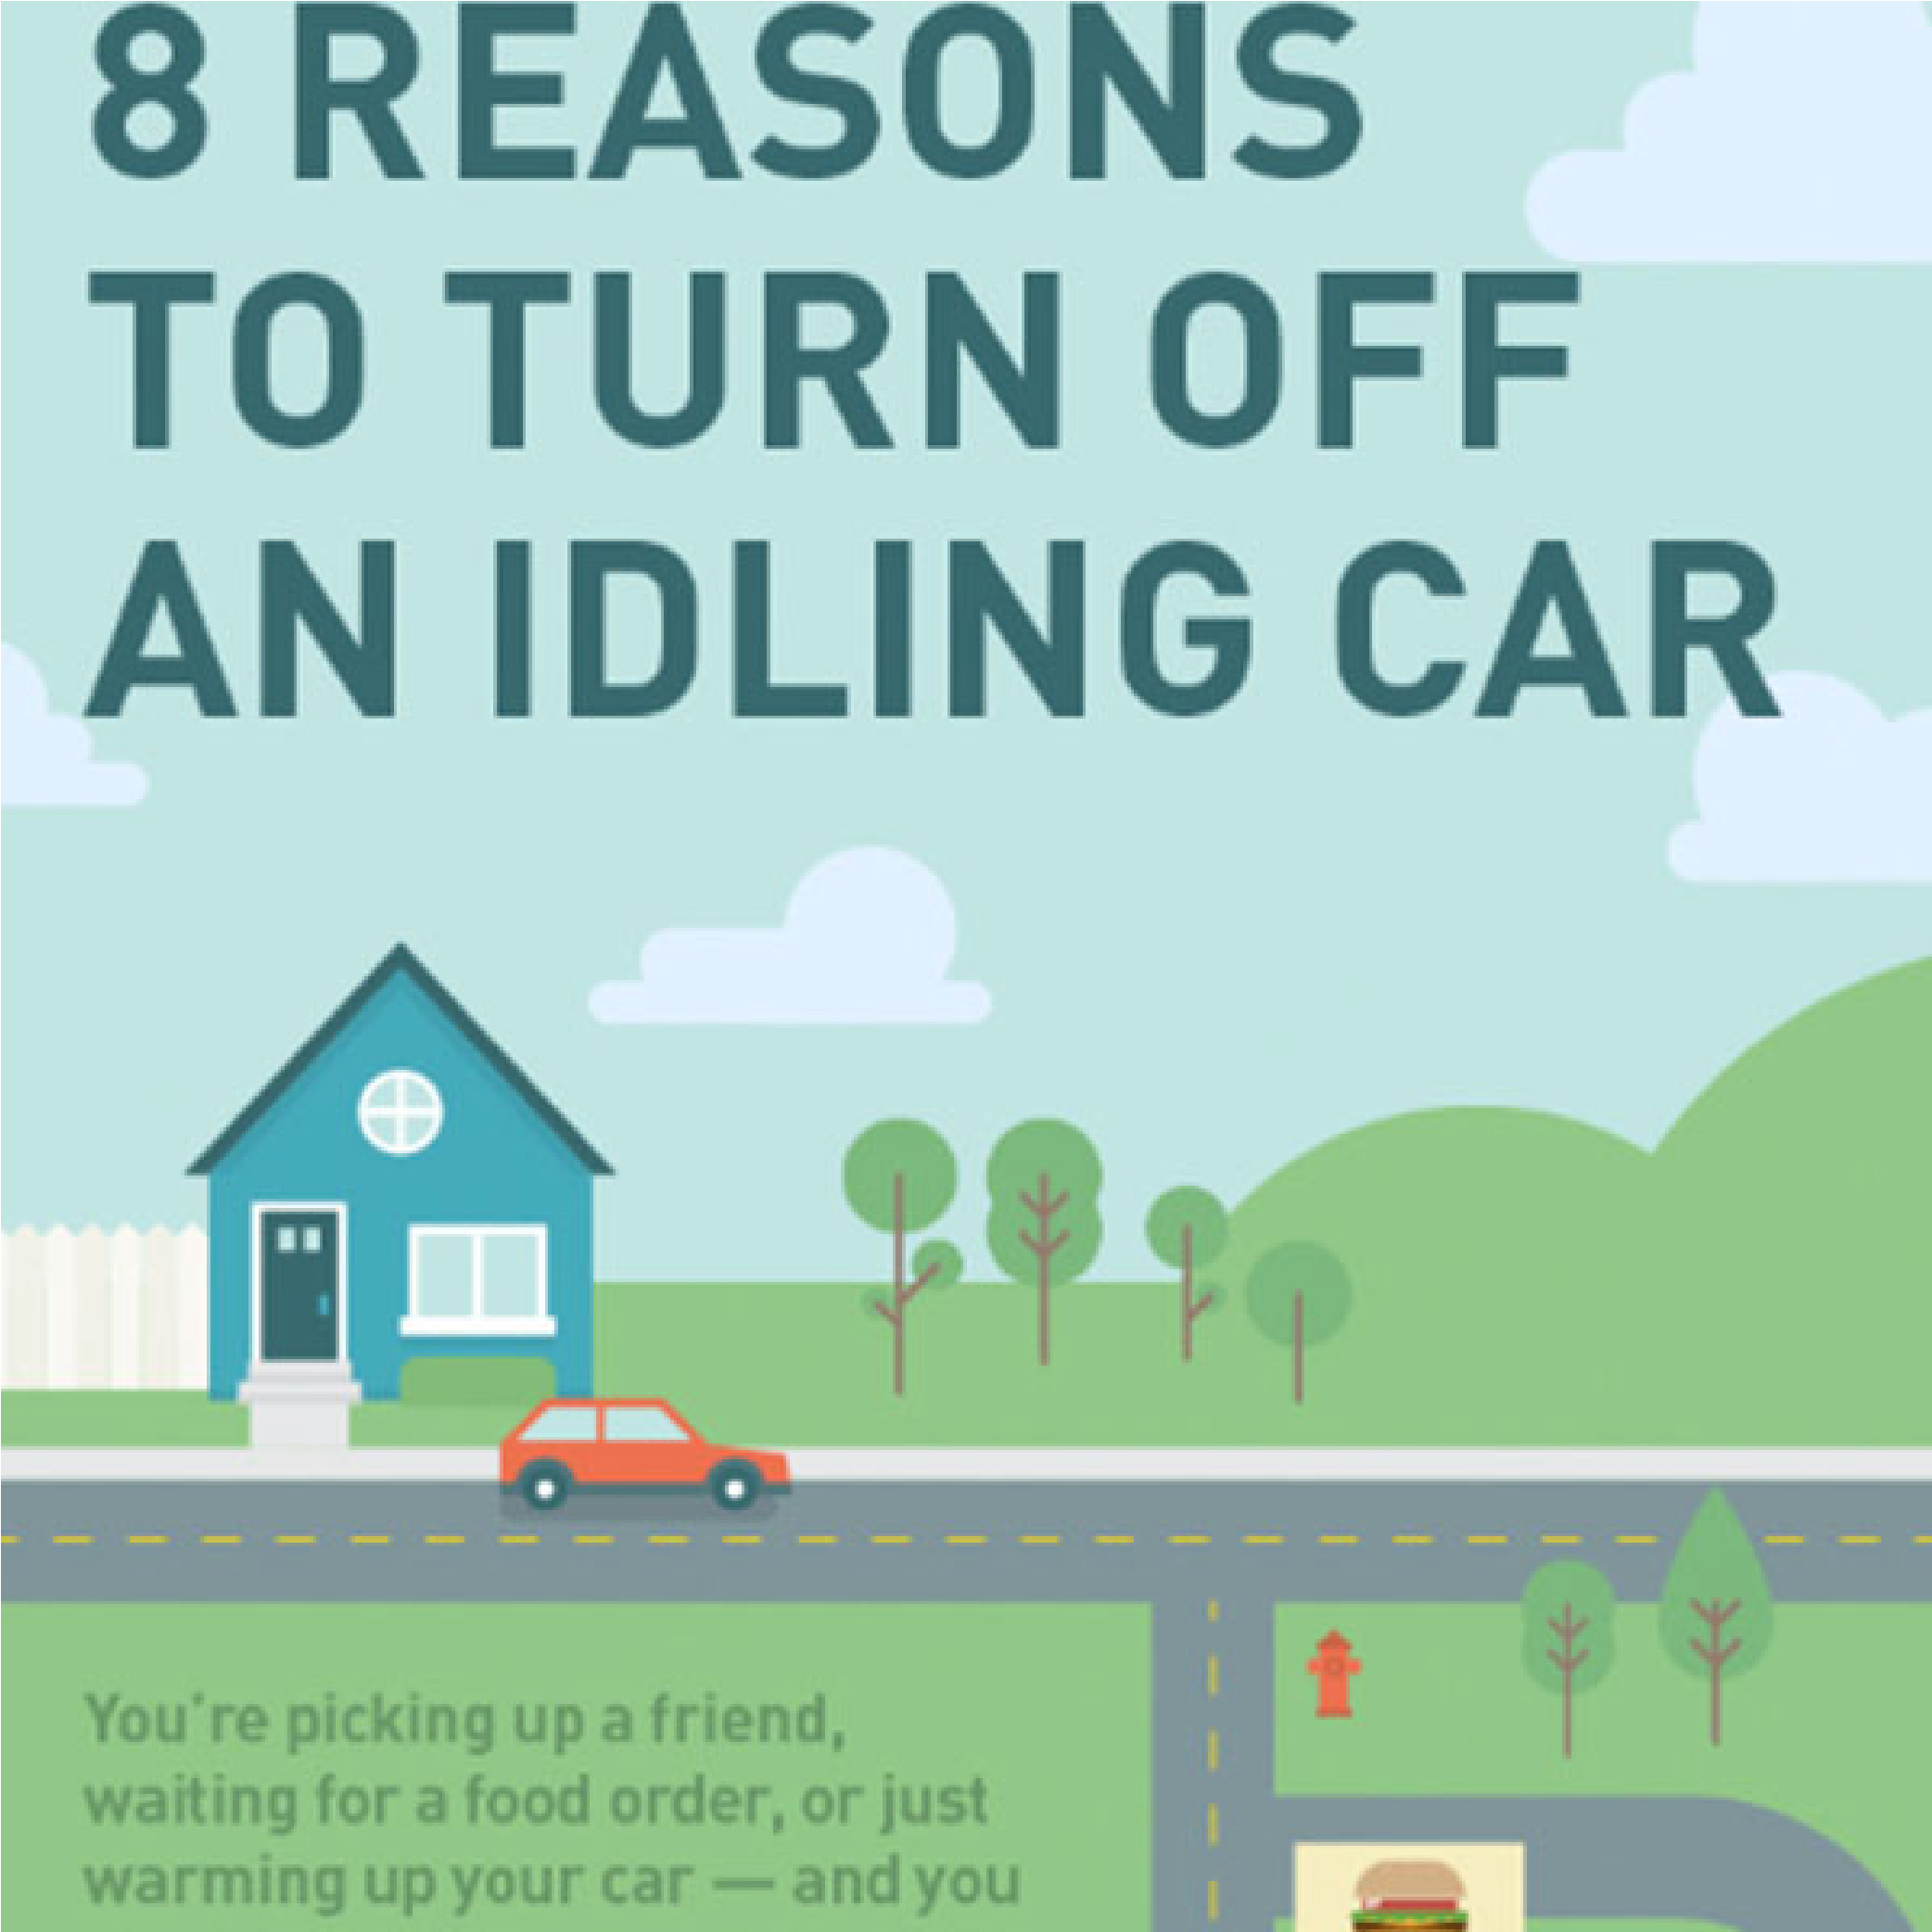 Infographic: 8 Reasons to Turn Off an Idling Car